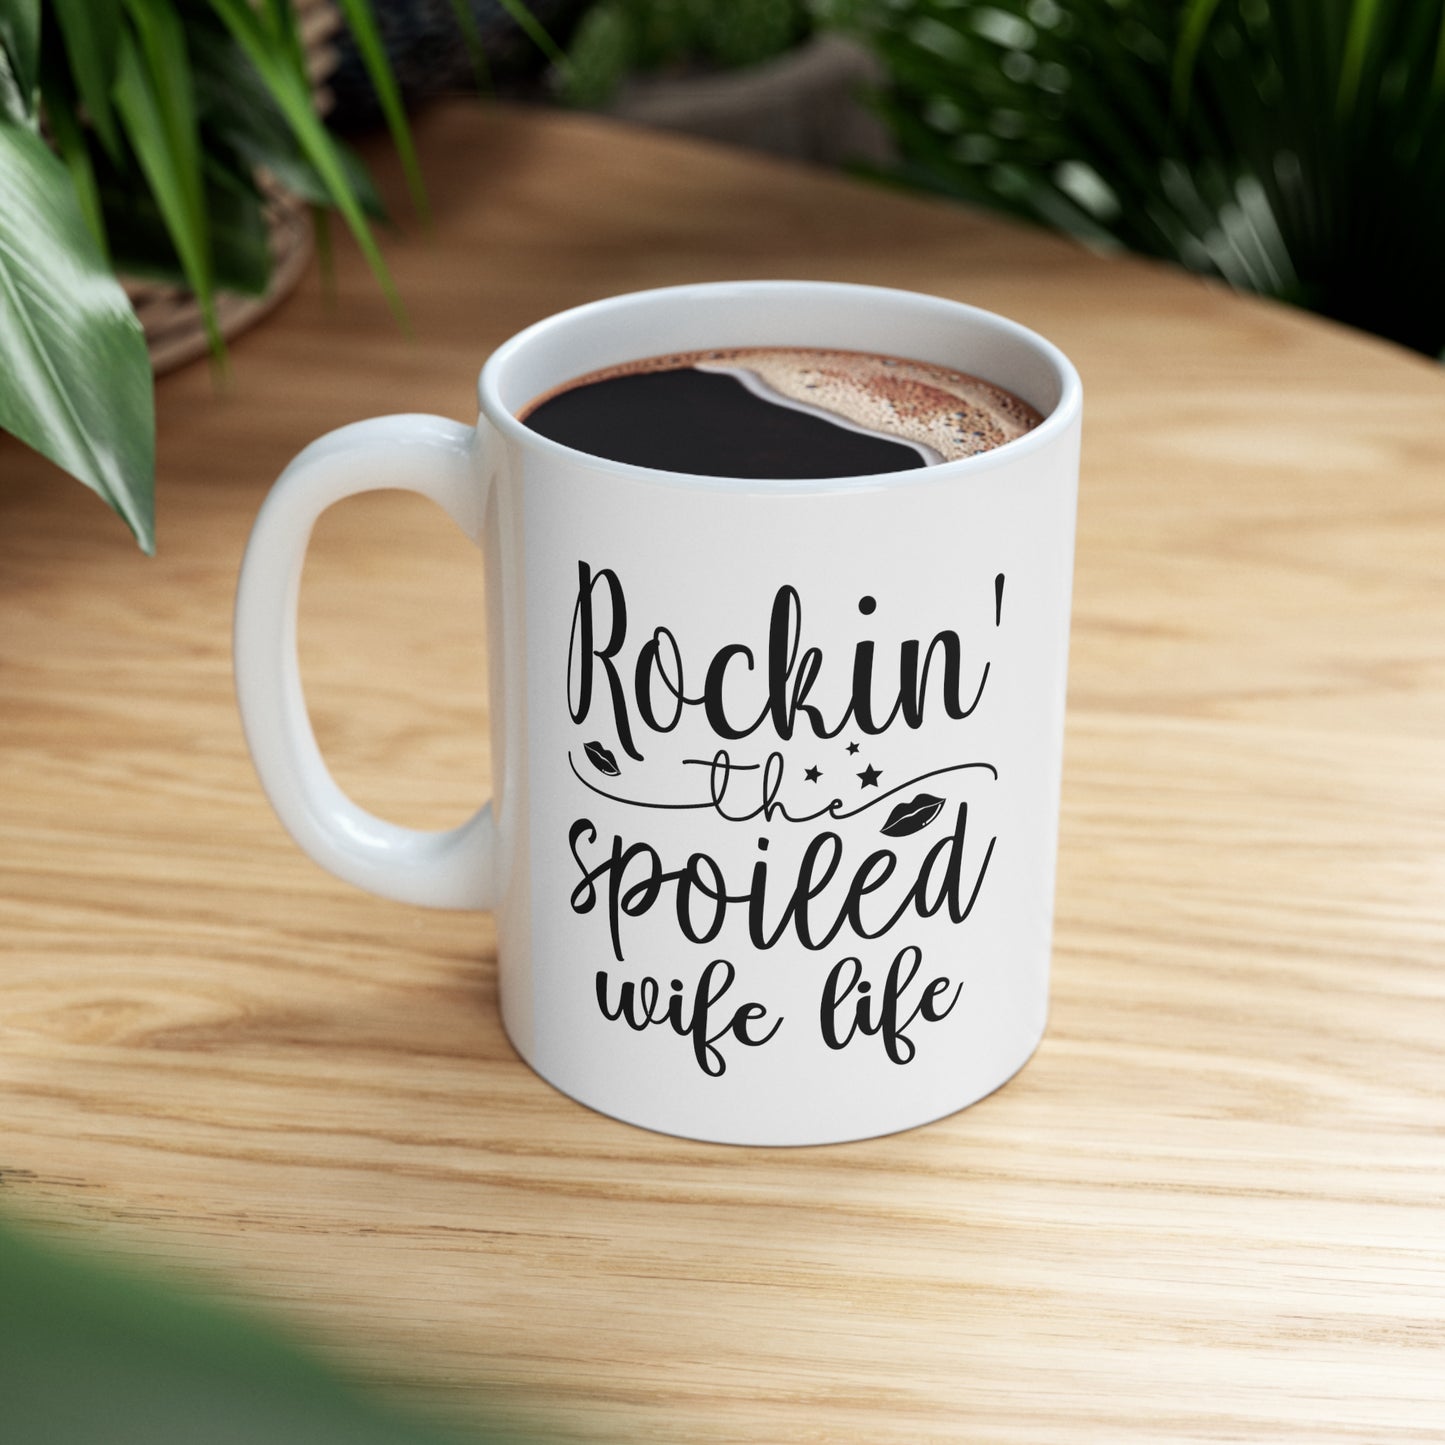 "Rockin' The Spoiled Wife Life" Coffee Mug - Weave Got Gifts - Unique Gifts You Won’t Find Anywhere Else!